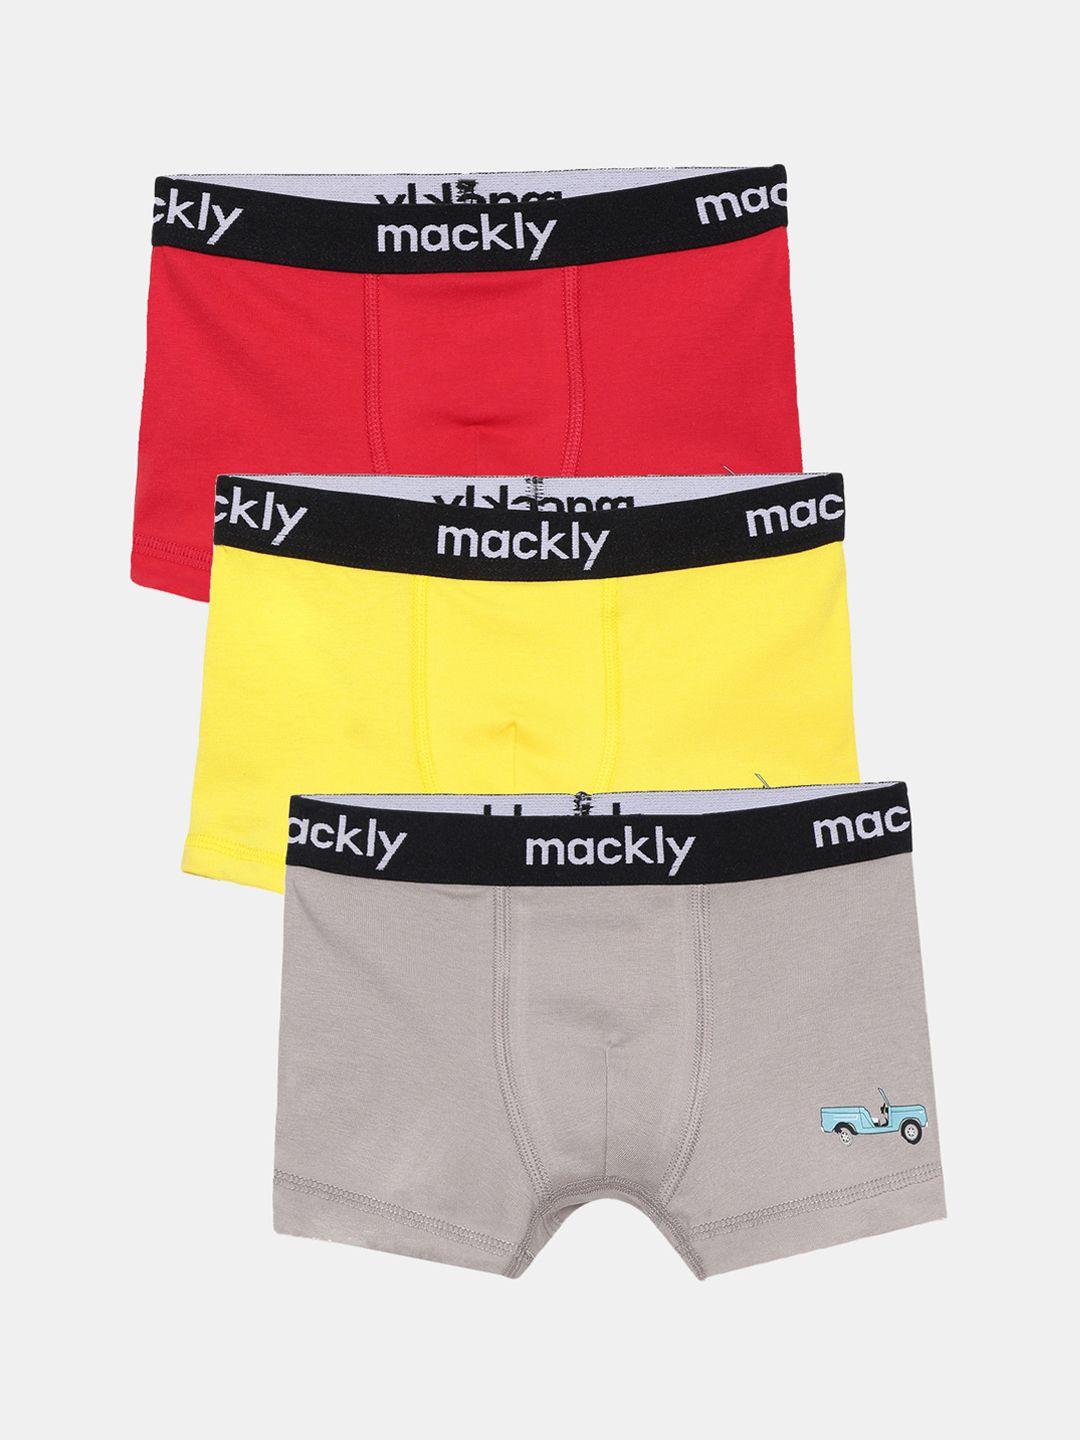 mackly boys pack of 3 mid-rise boxers